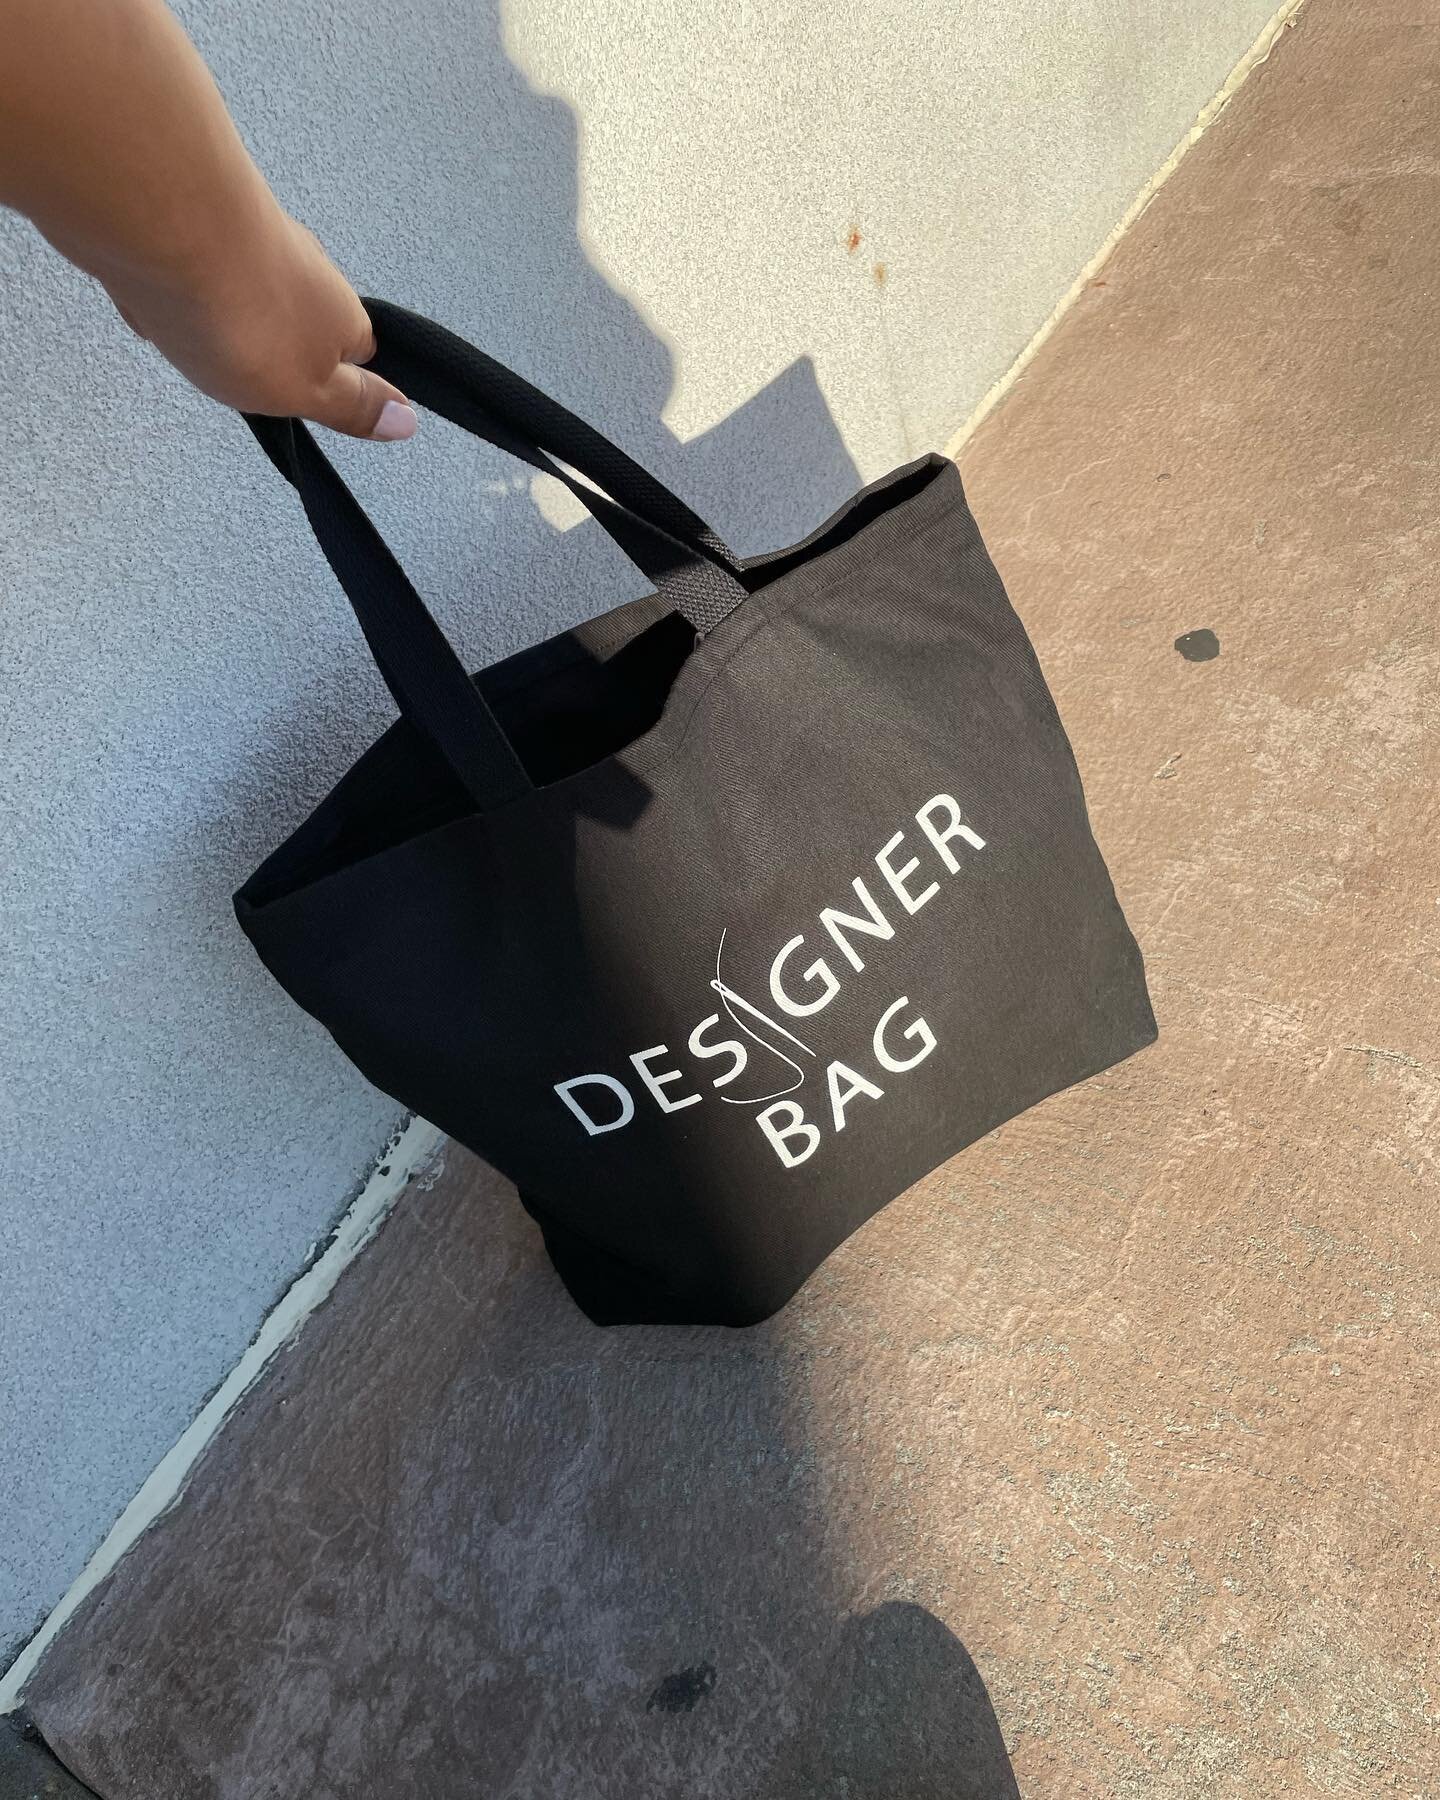 The &ldquo;Designer Bag&rdquo; tote bag out &amp; about on this sunny day ☀️

#alalitedesign #nyc #designer #totebag #designerbag #etsy #etsyshopsofinstagram #bags #style #creative #art #newyork #newjersey #designlife #sewing #fashion #fashiondesign 